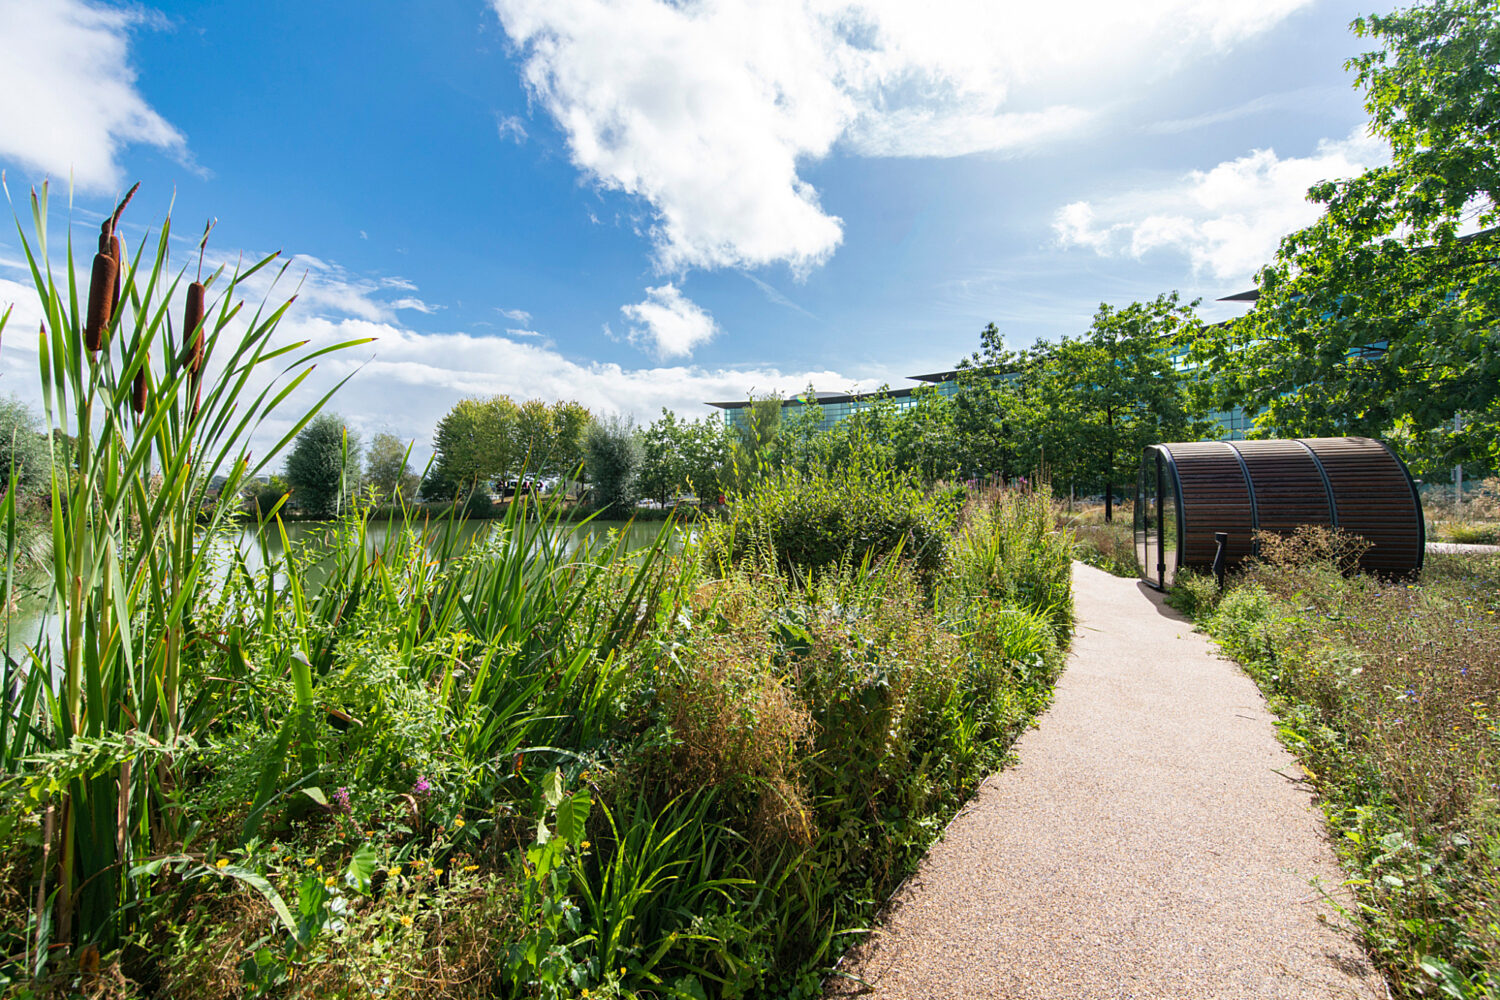 An external working pod seamlessly blends with the wild garden space at Campus